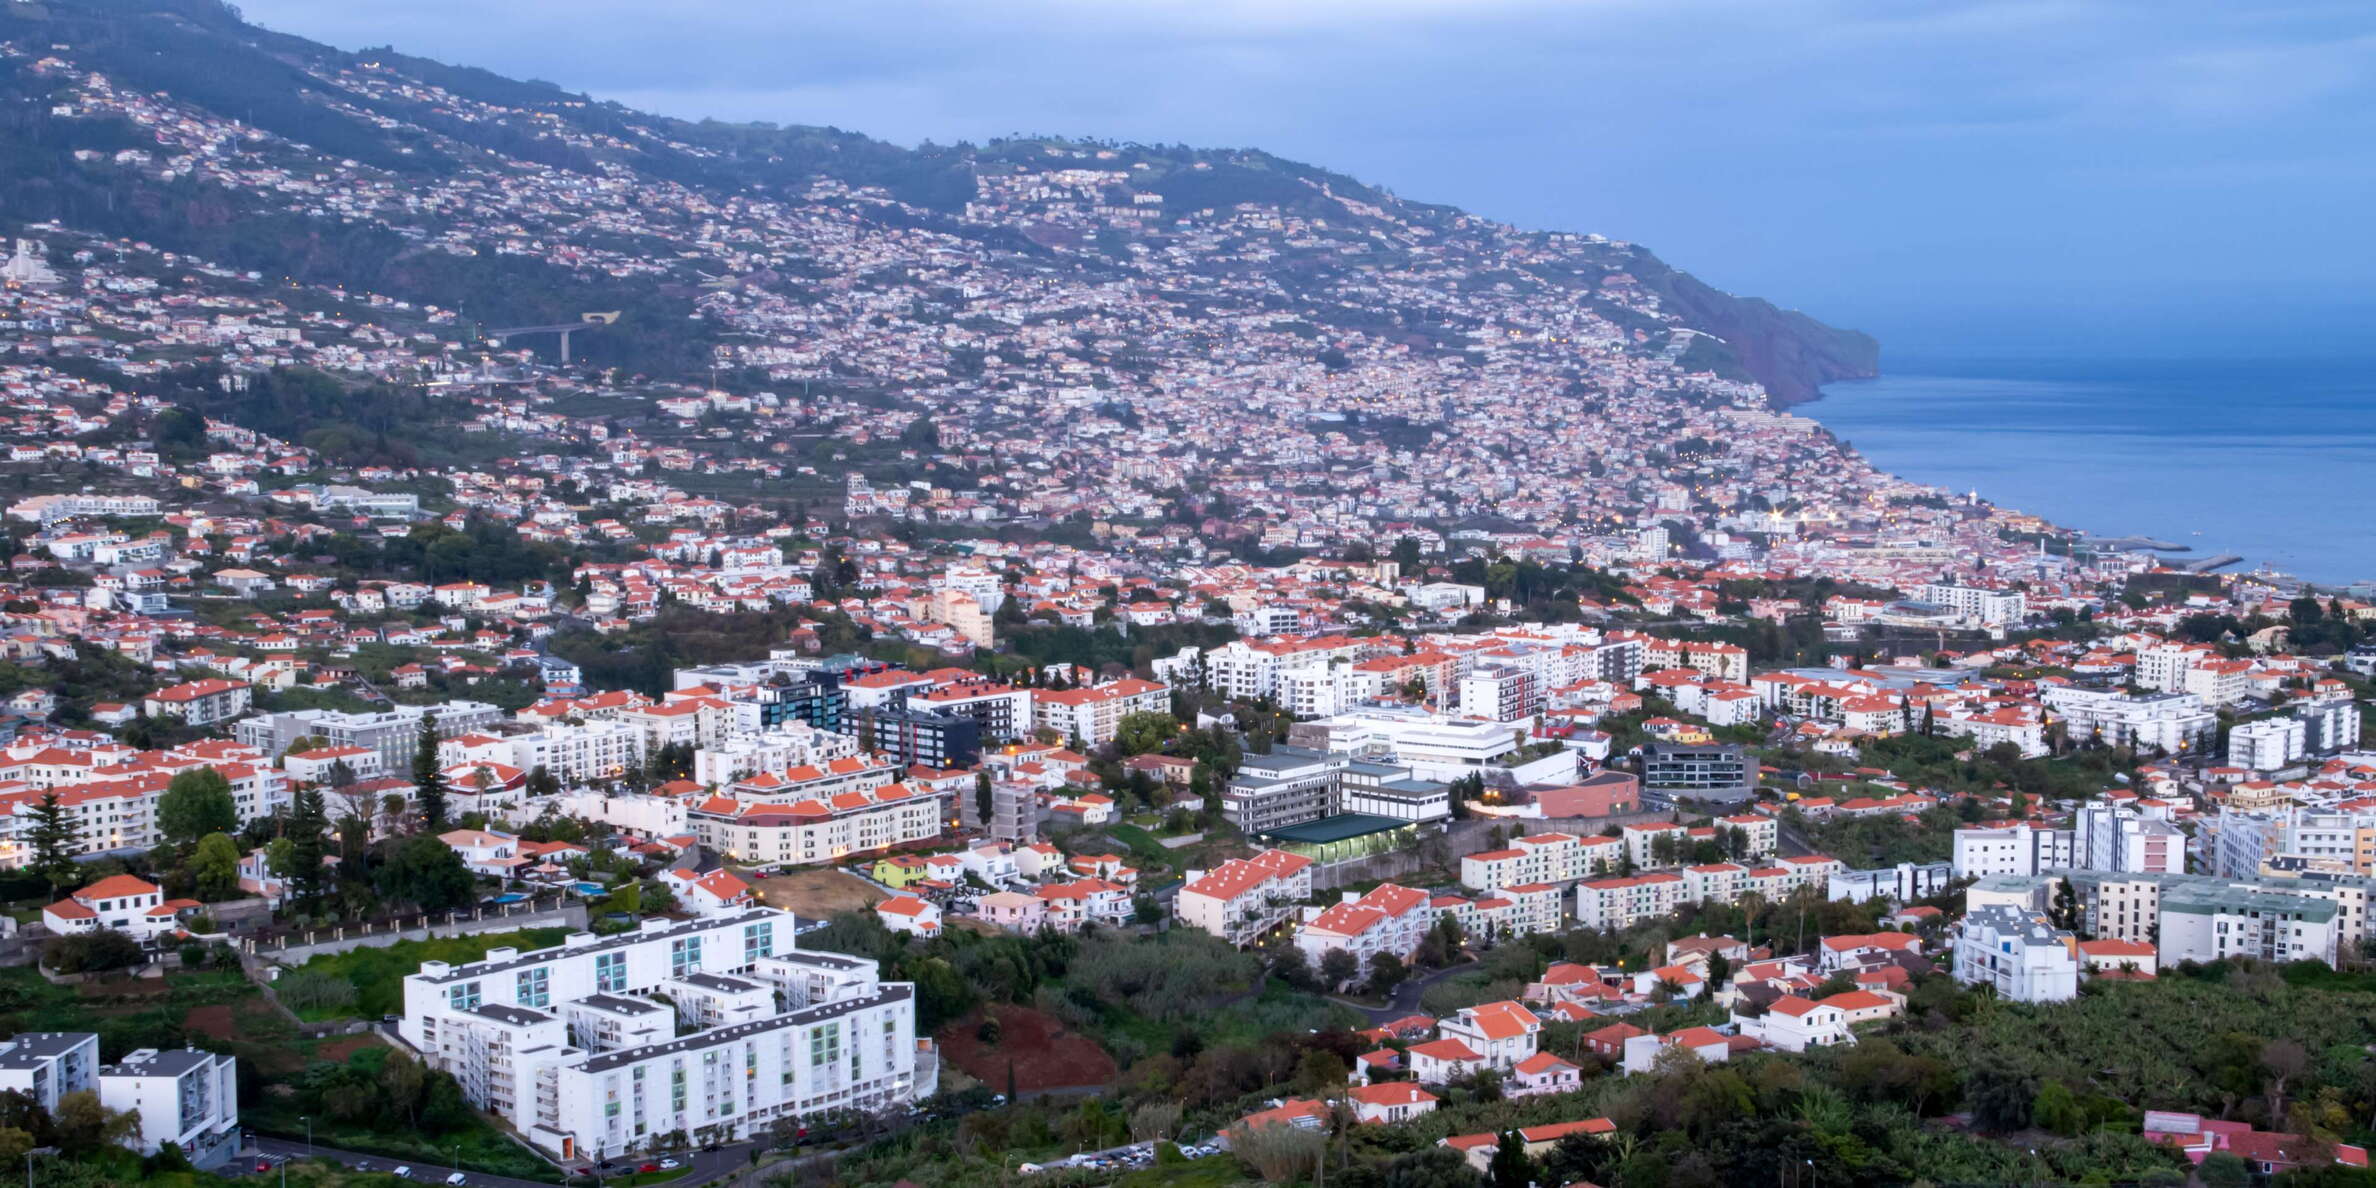 Funchal at sunset